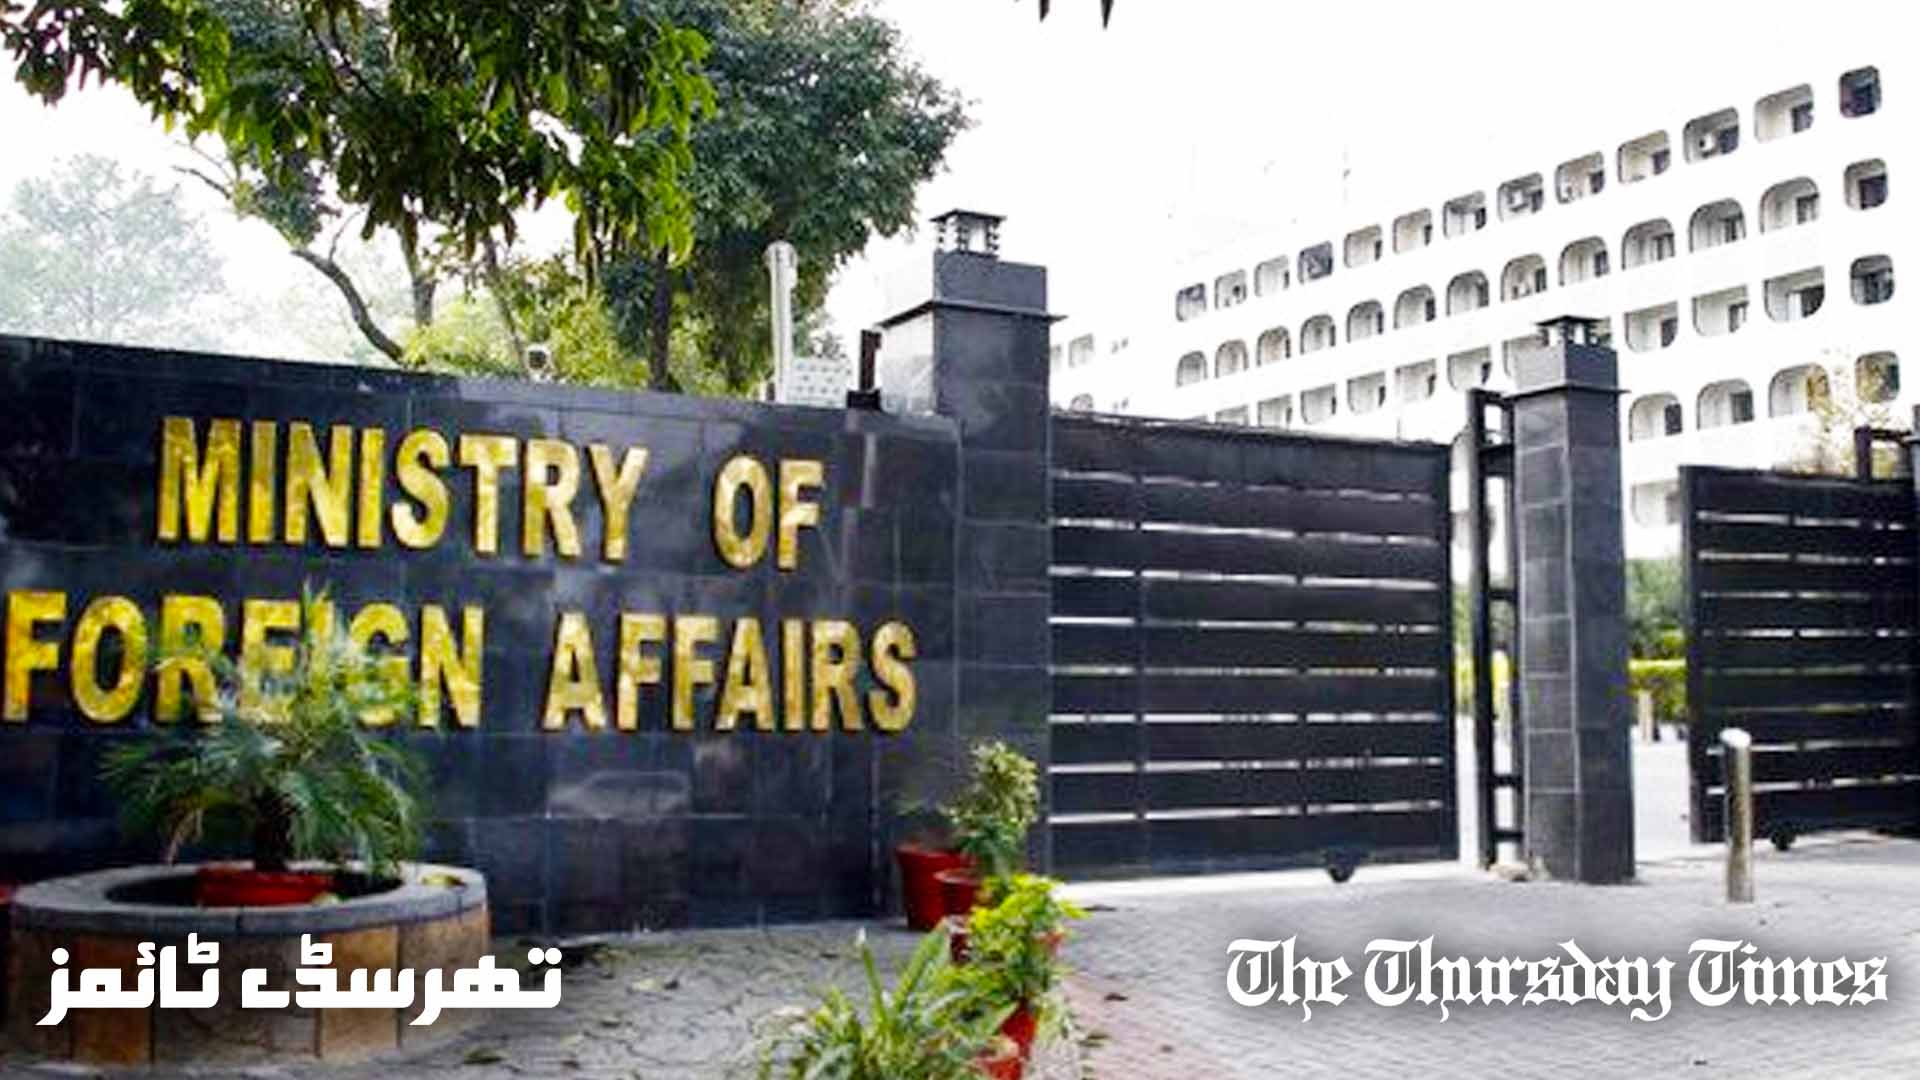 A file photo is shown of ministry of foreign affairs in Islamabad, Pakistan. — FILE/THE THURSDAY TIMES